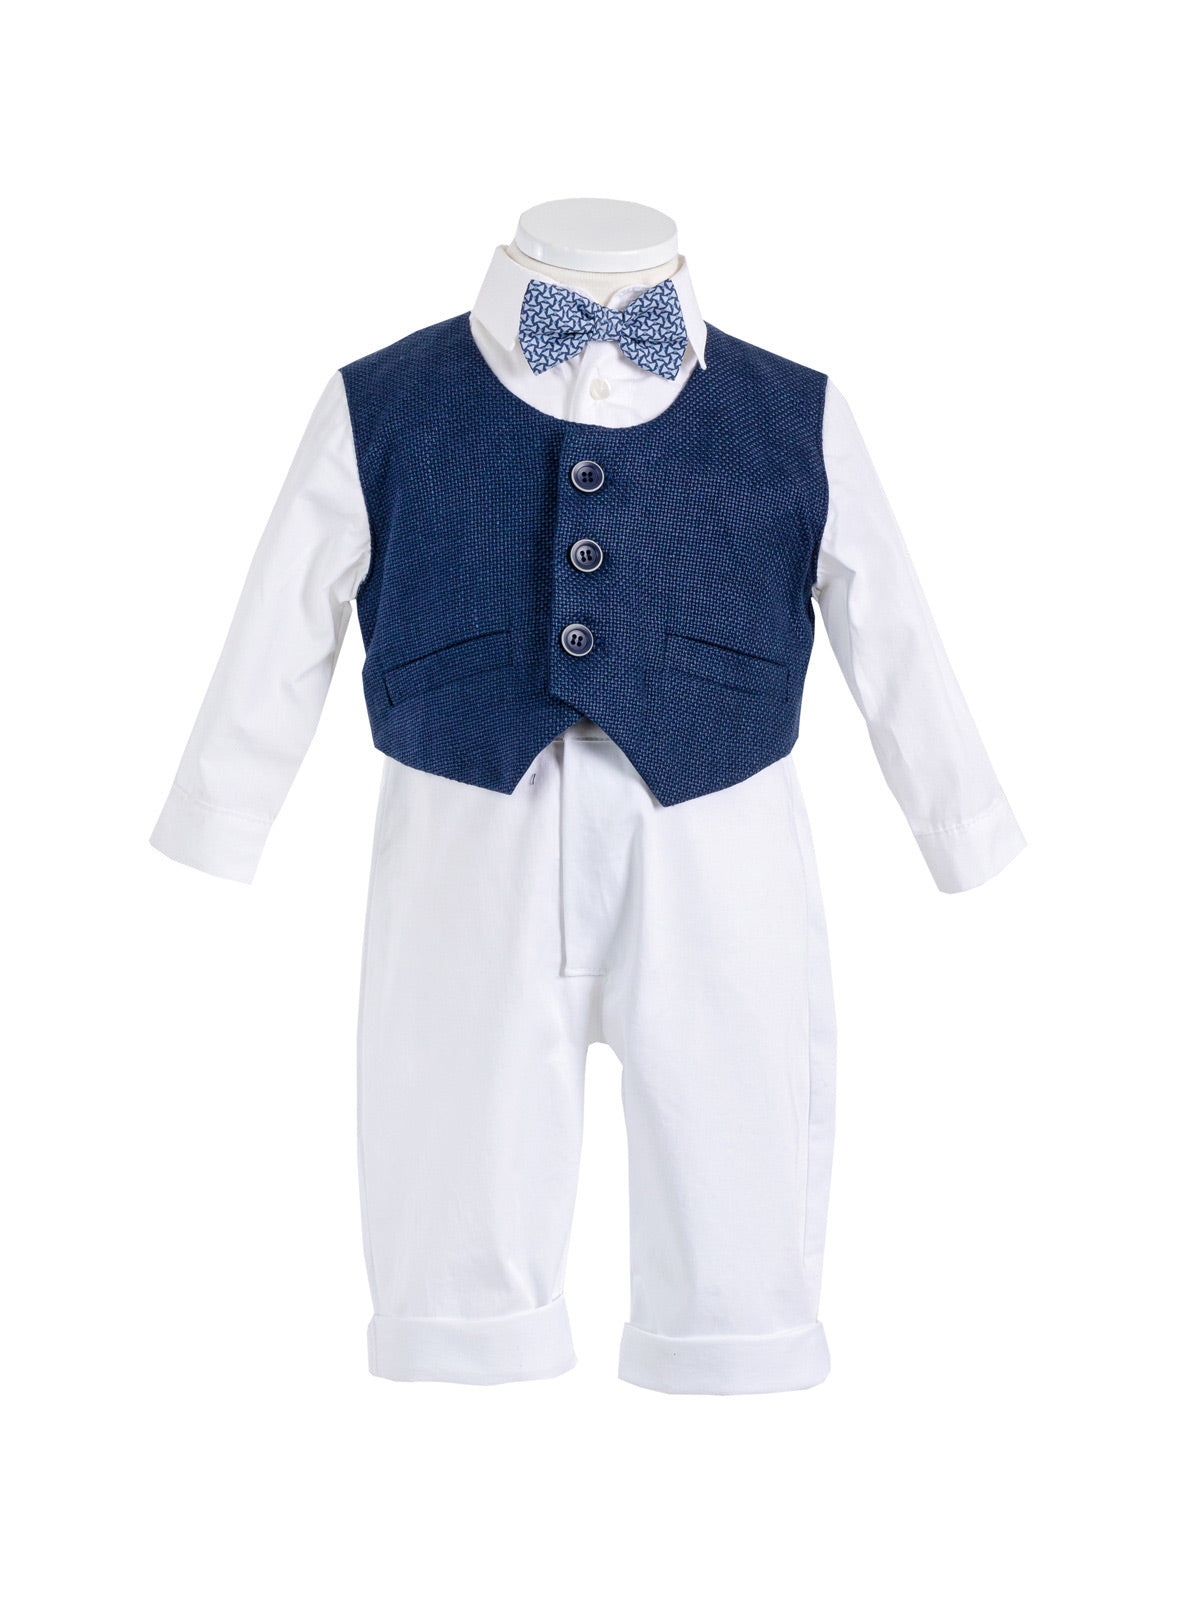 Baby playsuit for boy - TRISTAN